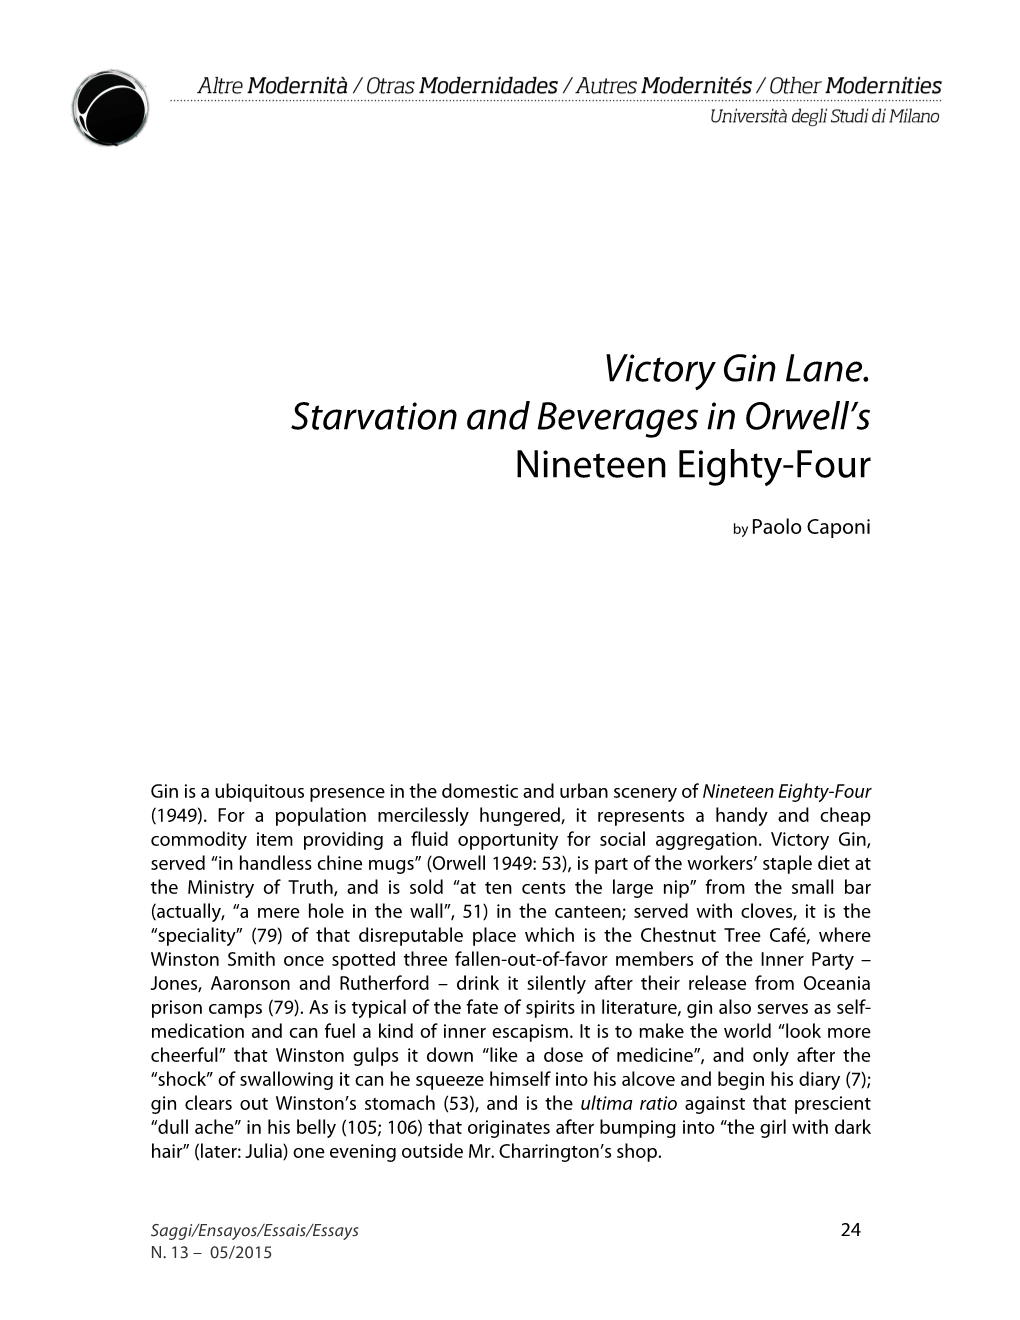 Victory Gin Lane. Starvation and Beverages in Orwell's Nineteen